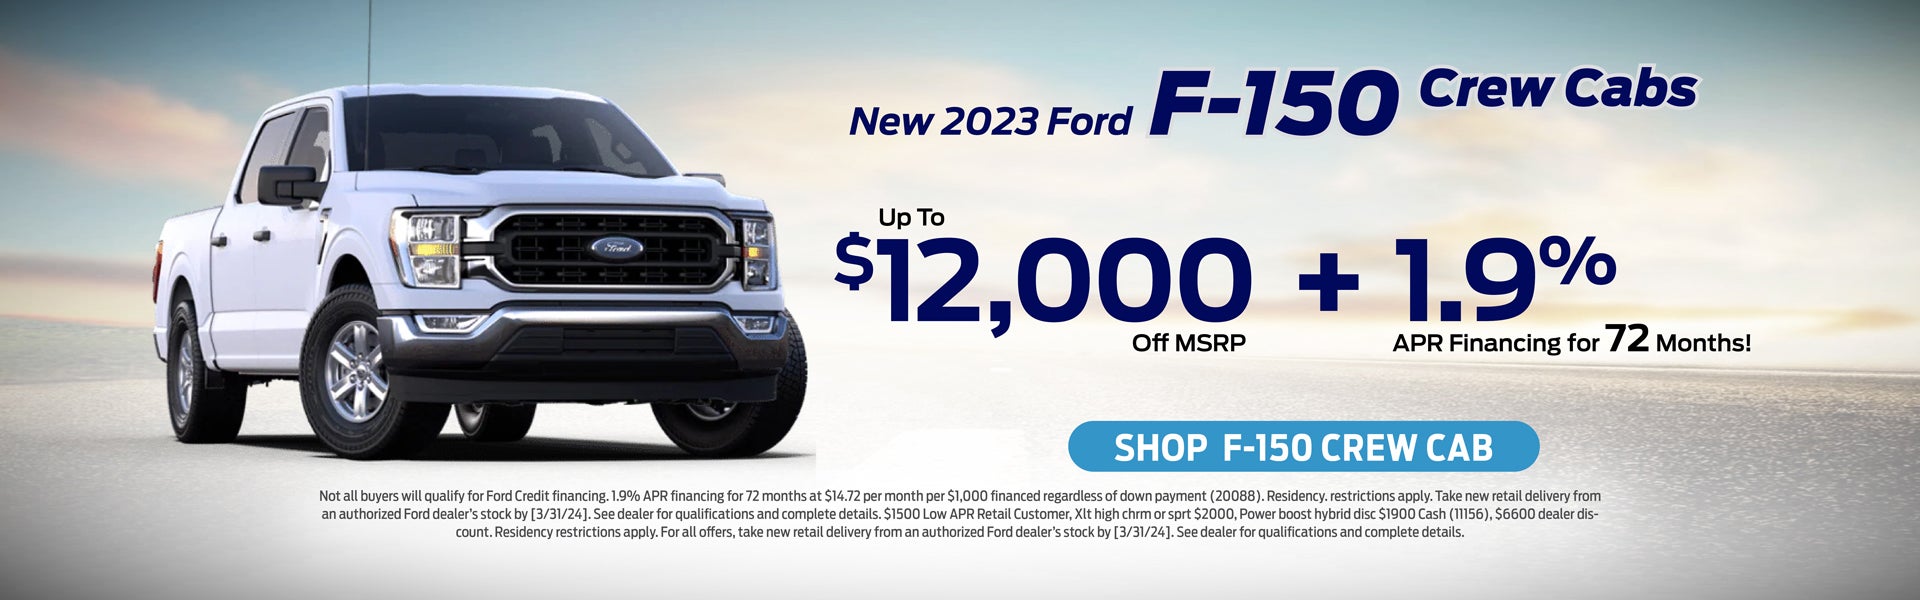 2023 F-150 Special